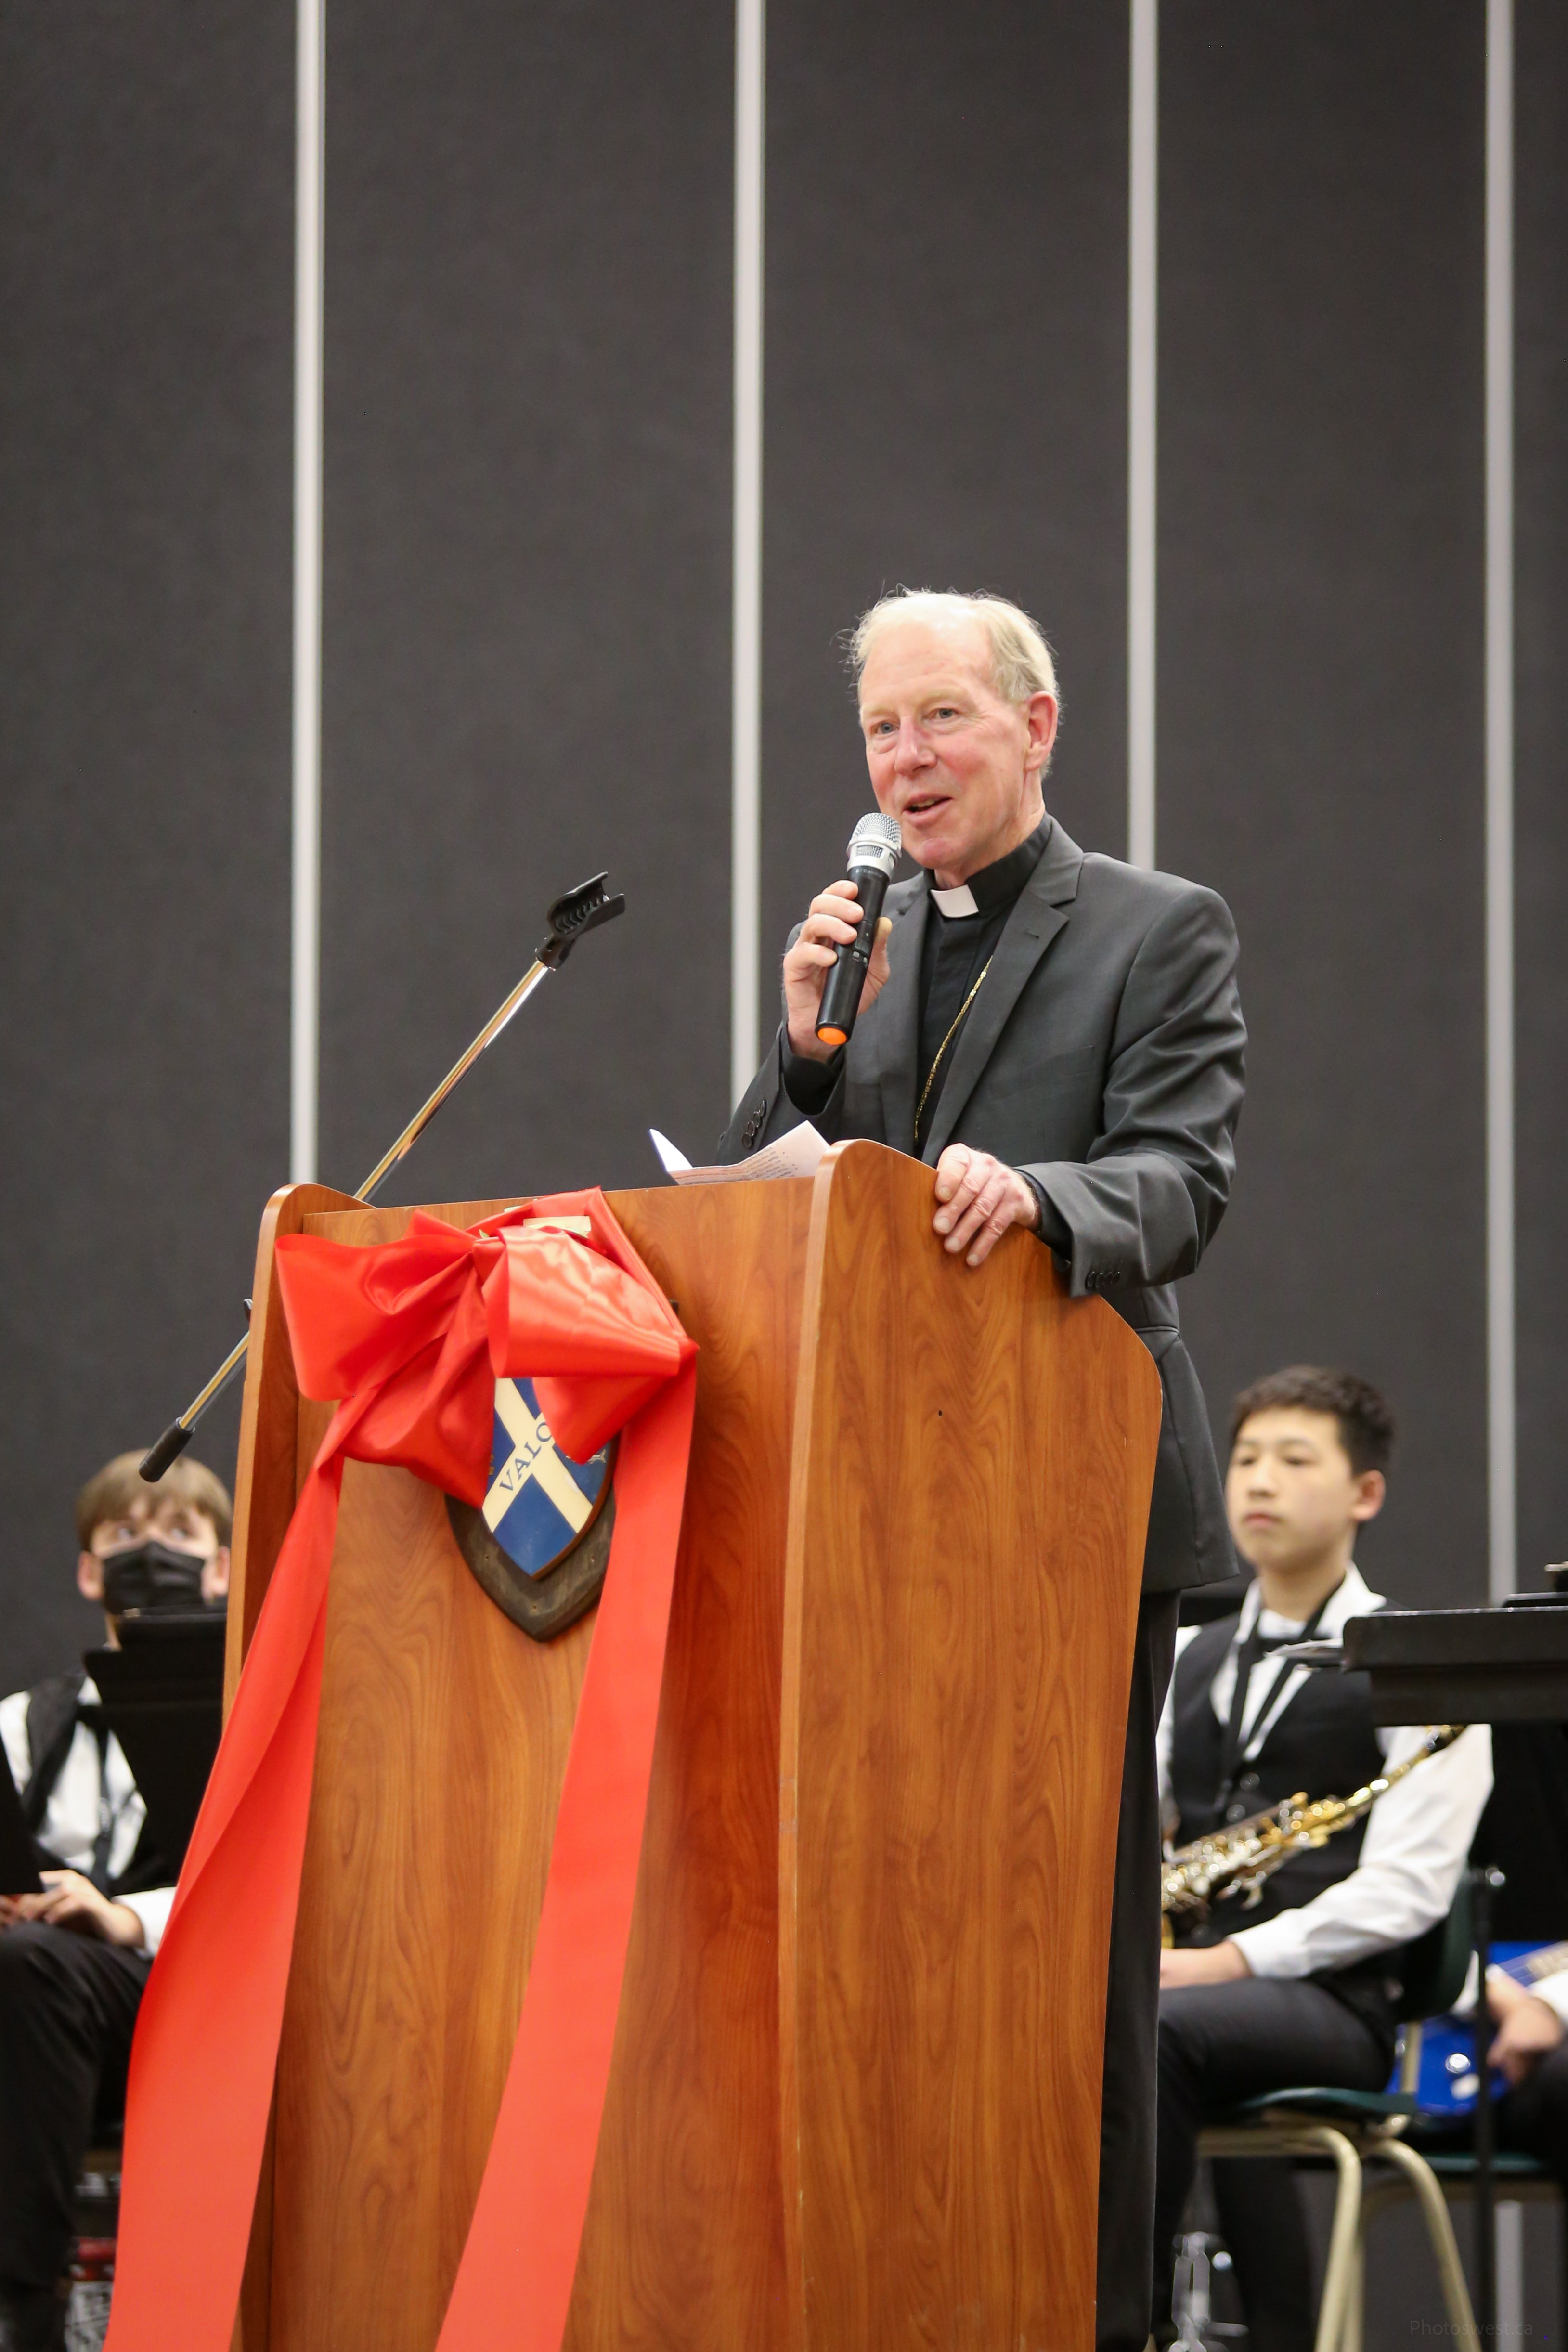 Bishop Gary speaking at a podium decorated with St. Andrew's Regional High School crest and a red bow, while students look on